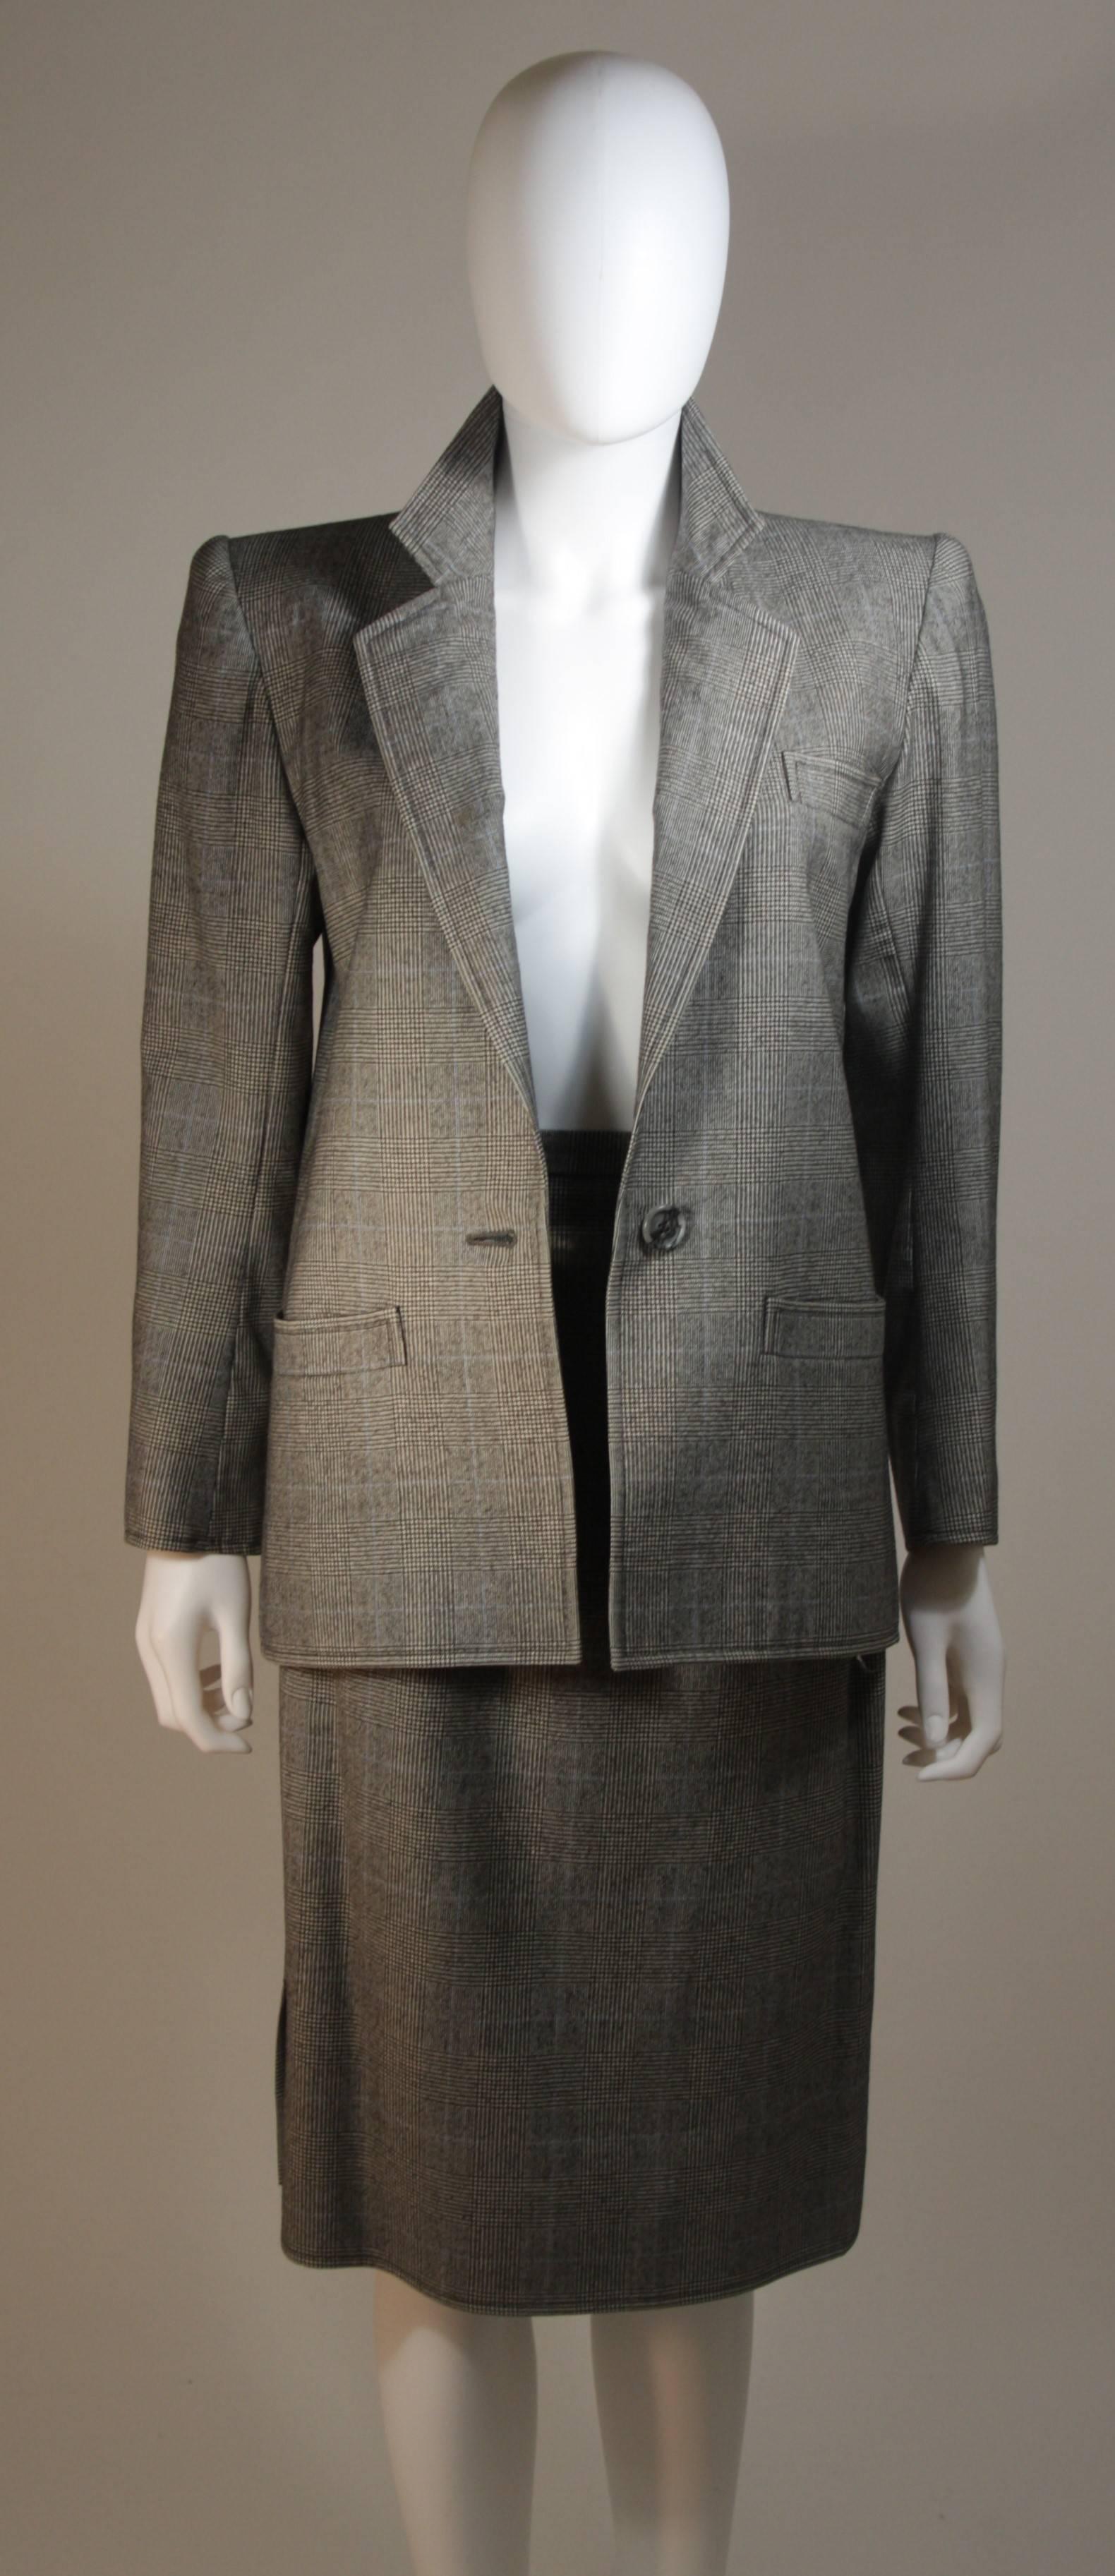 YVES SAINT LAURENT RIVE GAUCHE Grey Wool Plaid Skirt Suit with Blue Size 38 40 In Good Condition For Sale In Los Angeles, CA